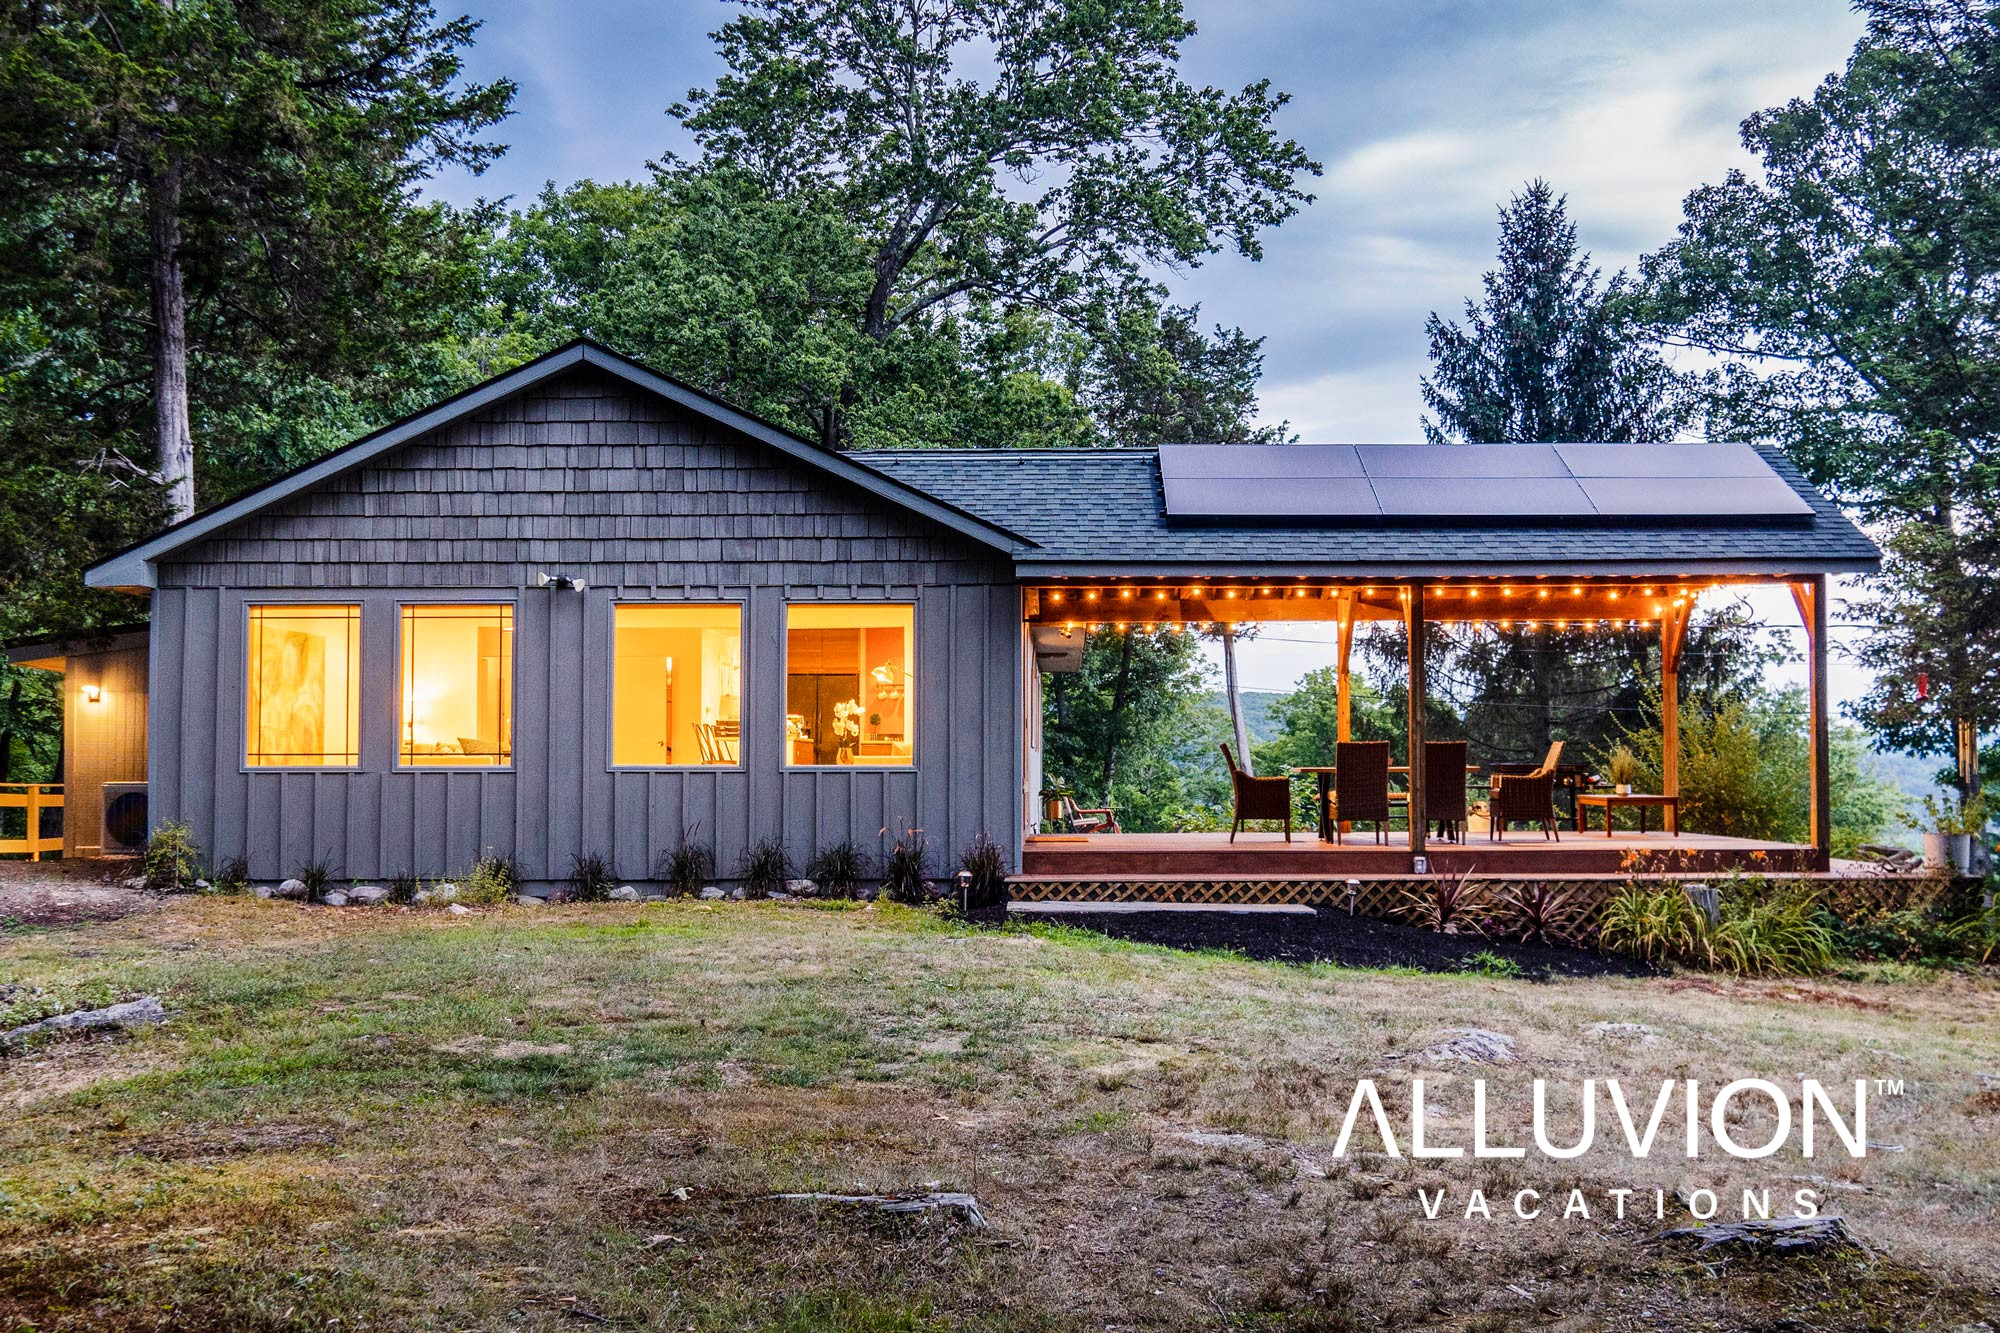 Stay at the Contemporary Airbnb Mountain Cabin in the Hudson Valley – Alluvion Vacations